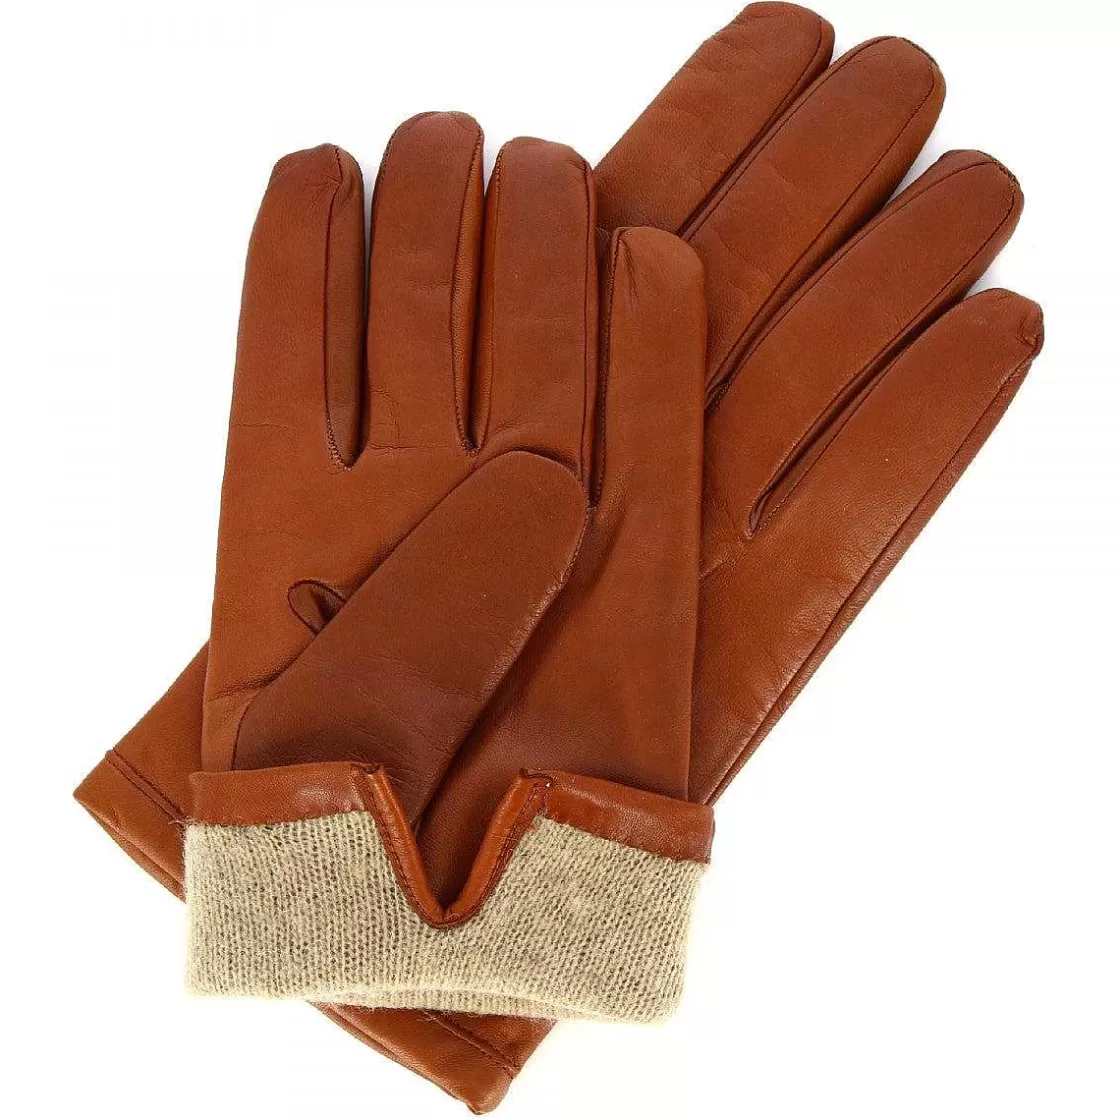 Leonardo Handmade Men'S Gloves In Brown Nappa Leather Lined In Cashmere Clearance